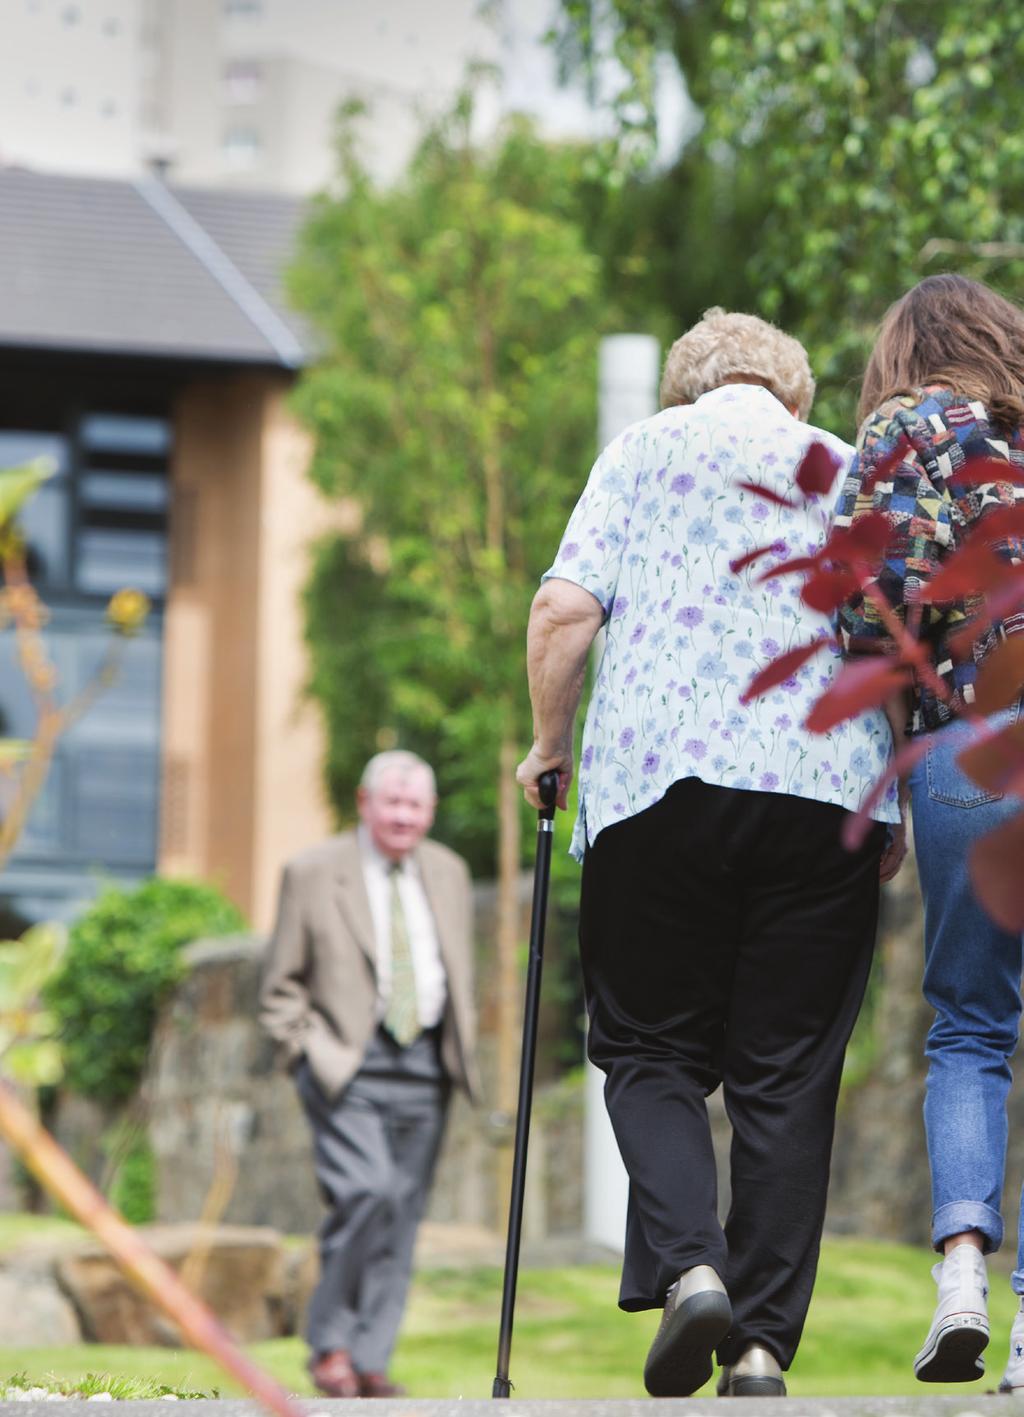 By working together, the Group s partner organisations are ideally placed to provide specialised and personalised care and support to vulnerable people across our communities.